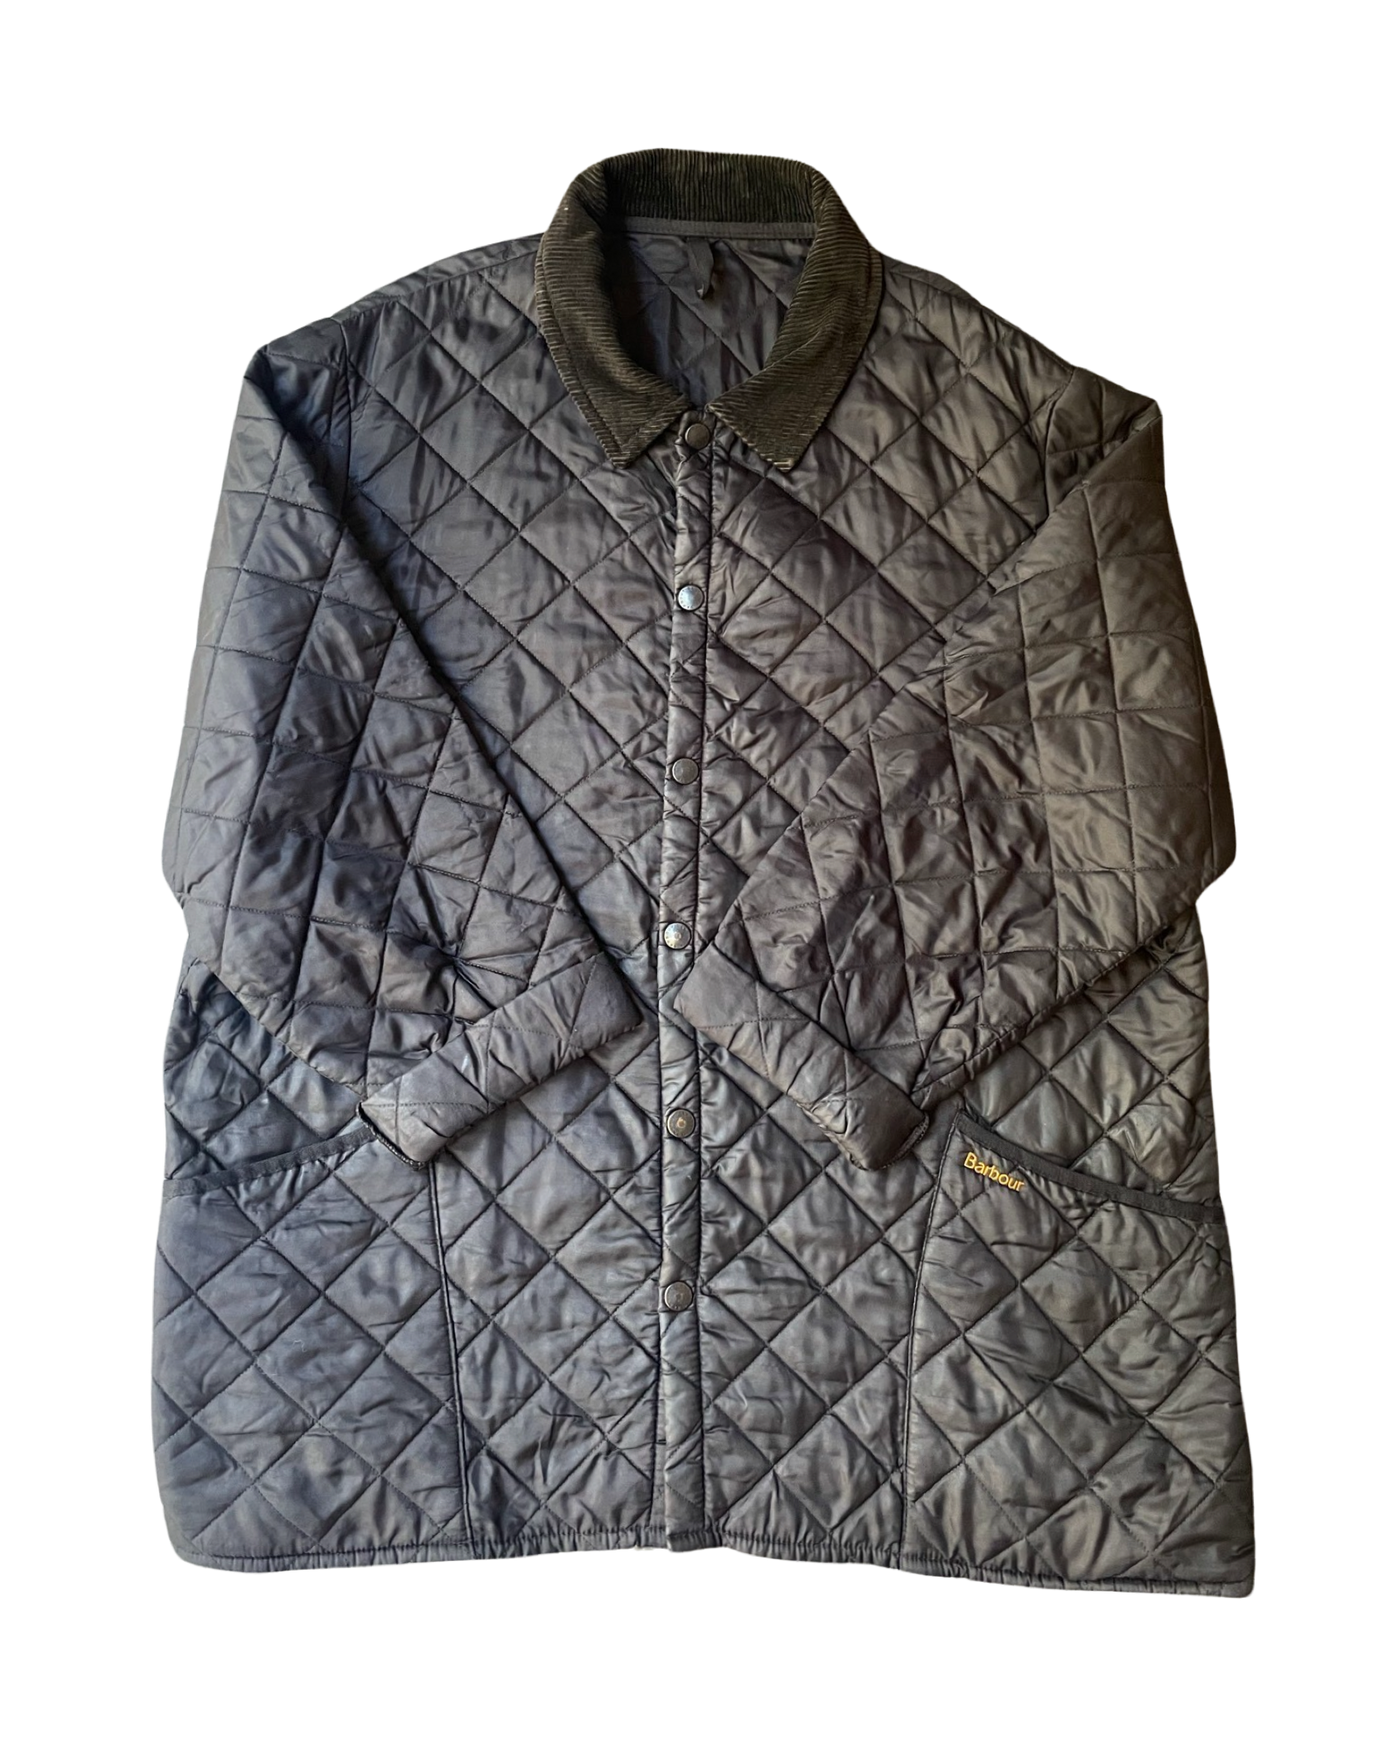 Vintage Barbour Quilted Jacket Size XL